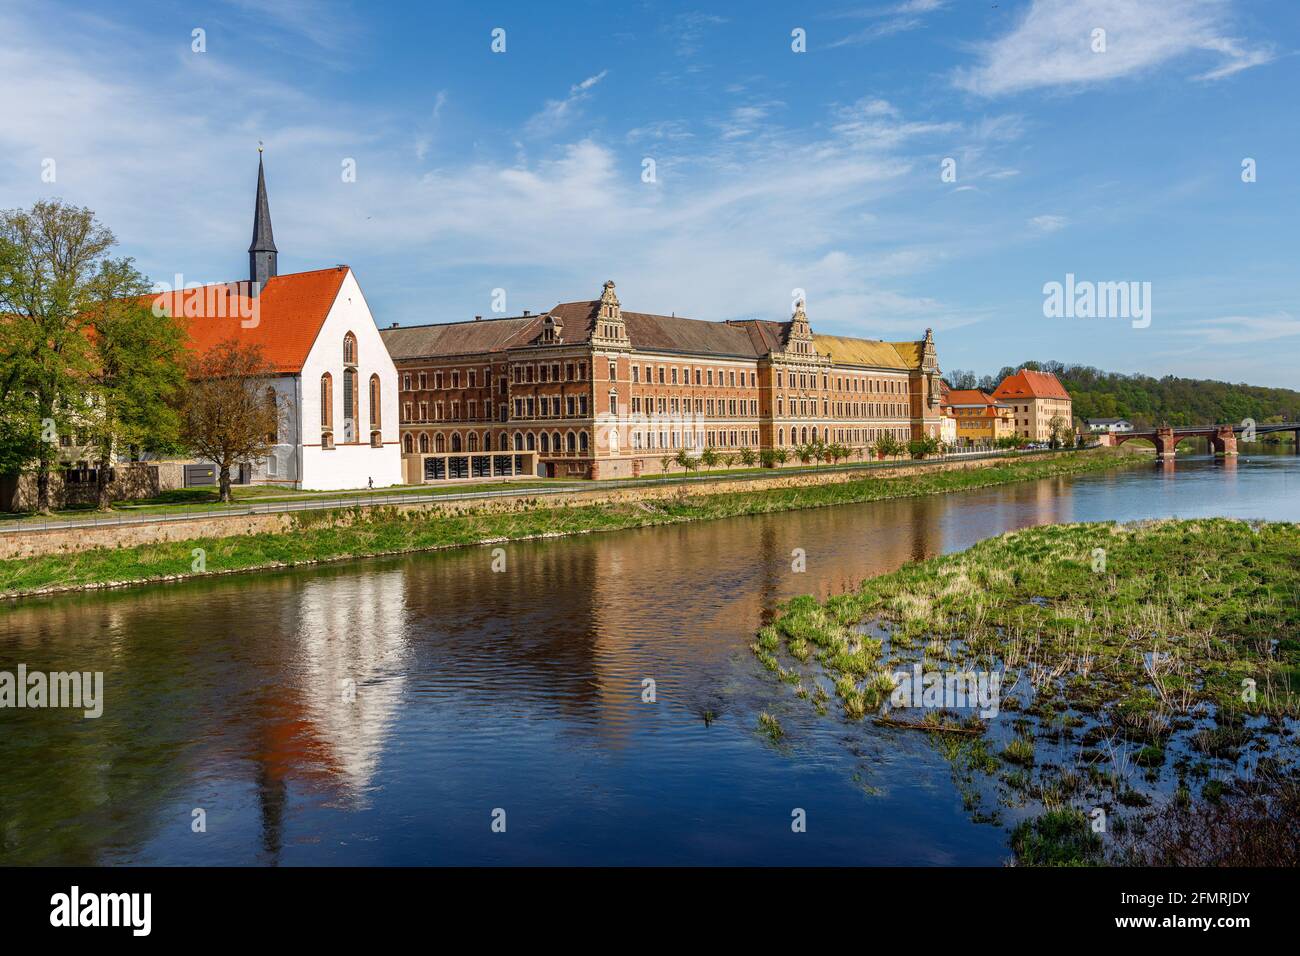 Grimma, Saxony, Germany- 05 11 2021, the small town on the river Mulde is known as the 'pearl of the Mulde valley'-Modern flood protection wall in the Stock Photo